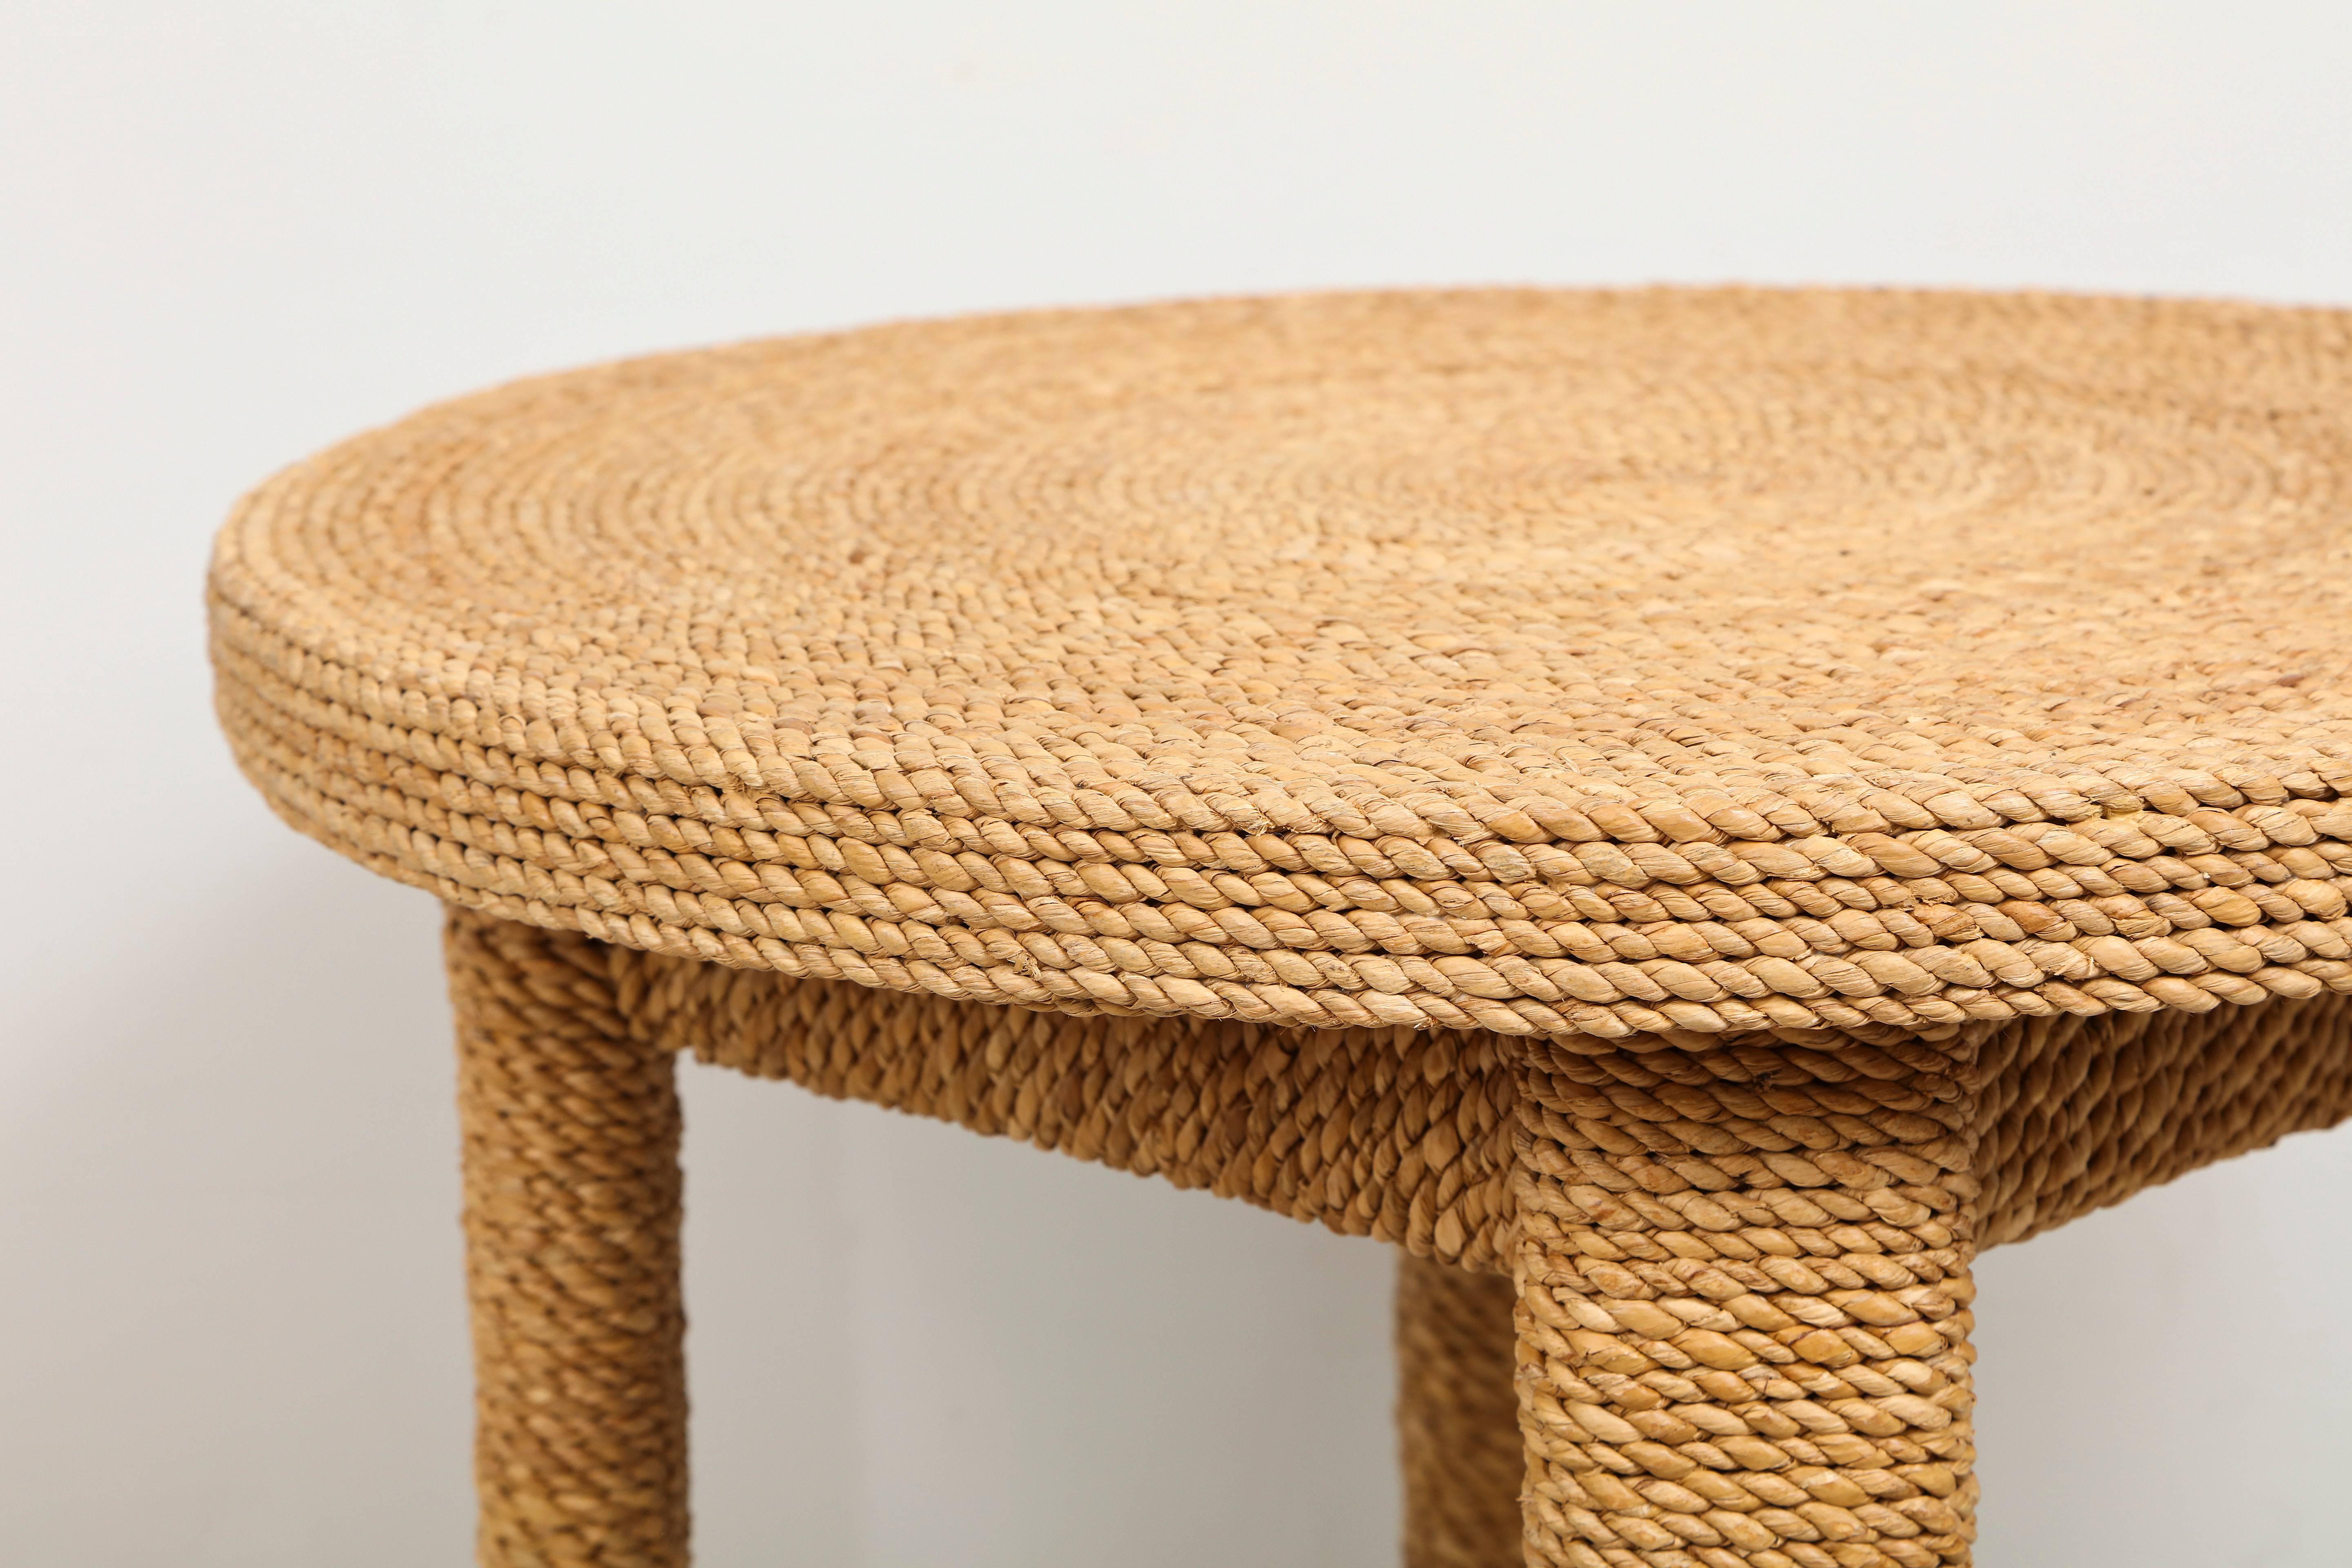 Contemporary Jute Table in Audoux Minet Manner